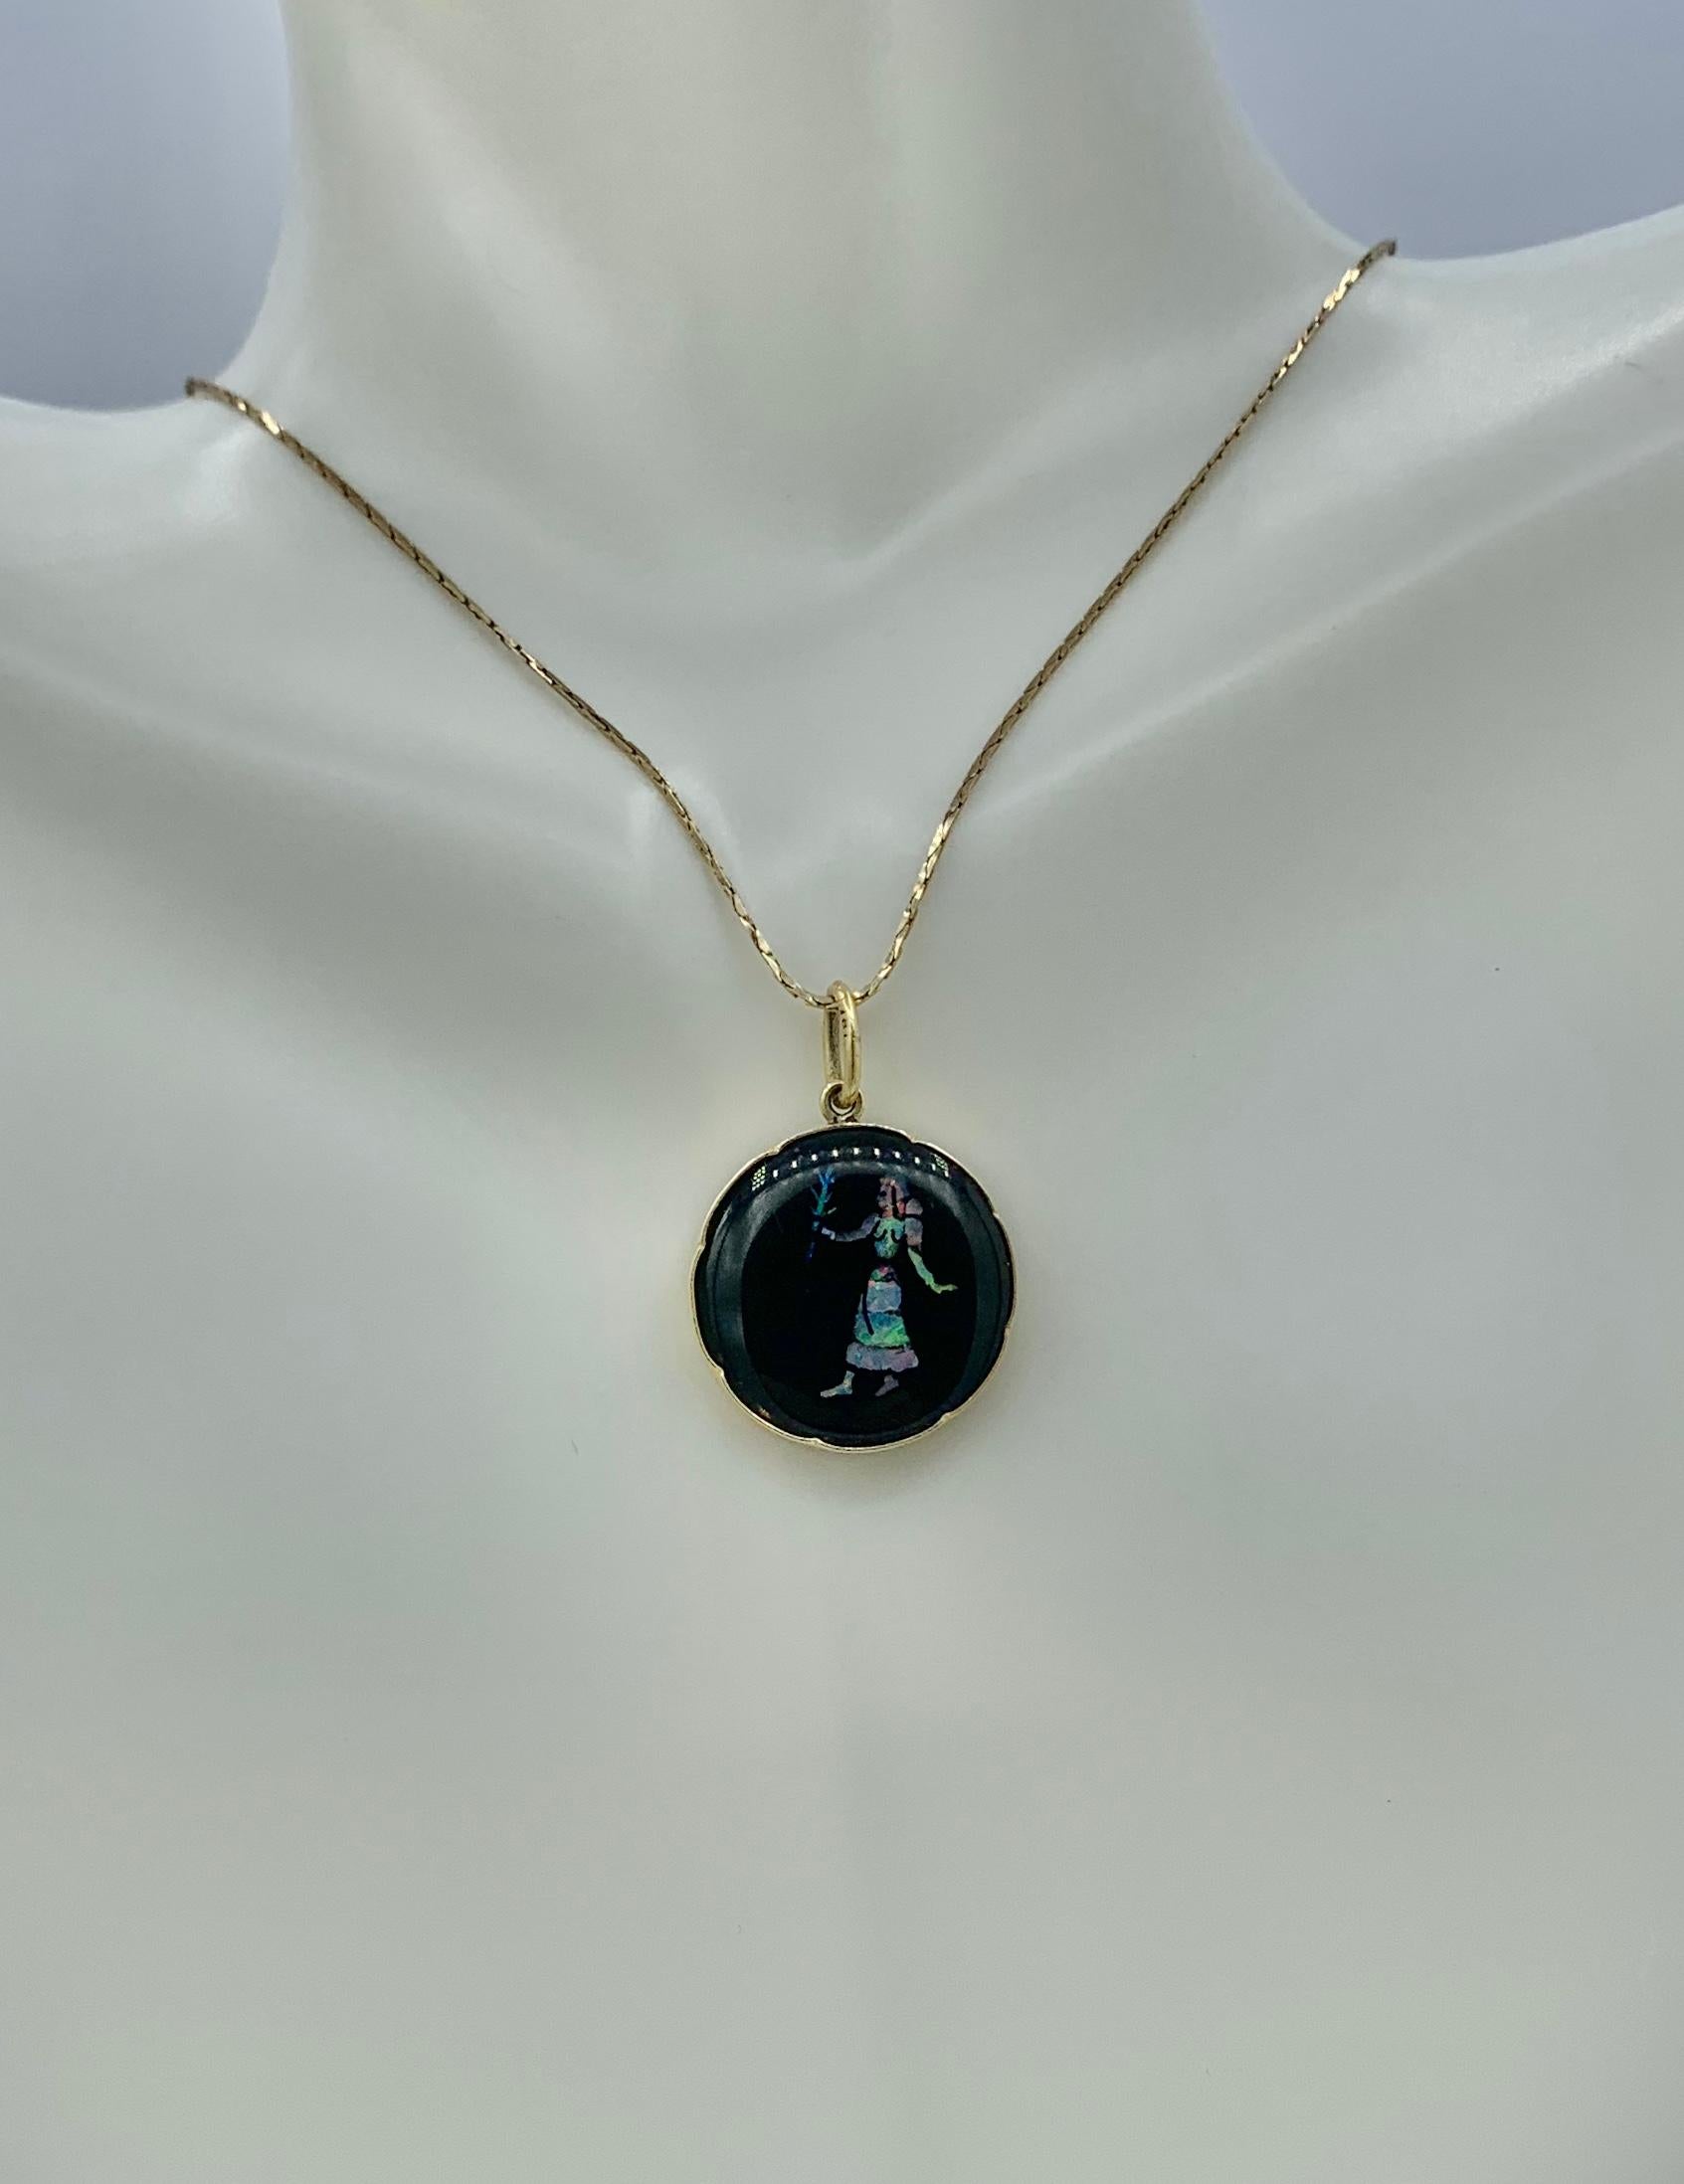 THIS IS A WONDERFUL AND VERY RARE INLAID BLACK OPAL PENDANT WITH AN IMAGE OF A WOMAN CARRYING A FLOWER.  THE PENDANT IS BLACK ONYX WITH INLAID BLACK OPAL GEMS AND IS SET IN 14 KARAT GOLD.  THE JEWEL IS A MASTERPIECE OF ART DECO JEWELRY DESIGN.  